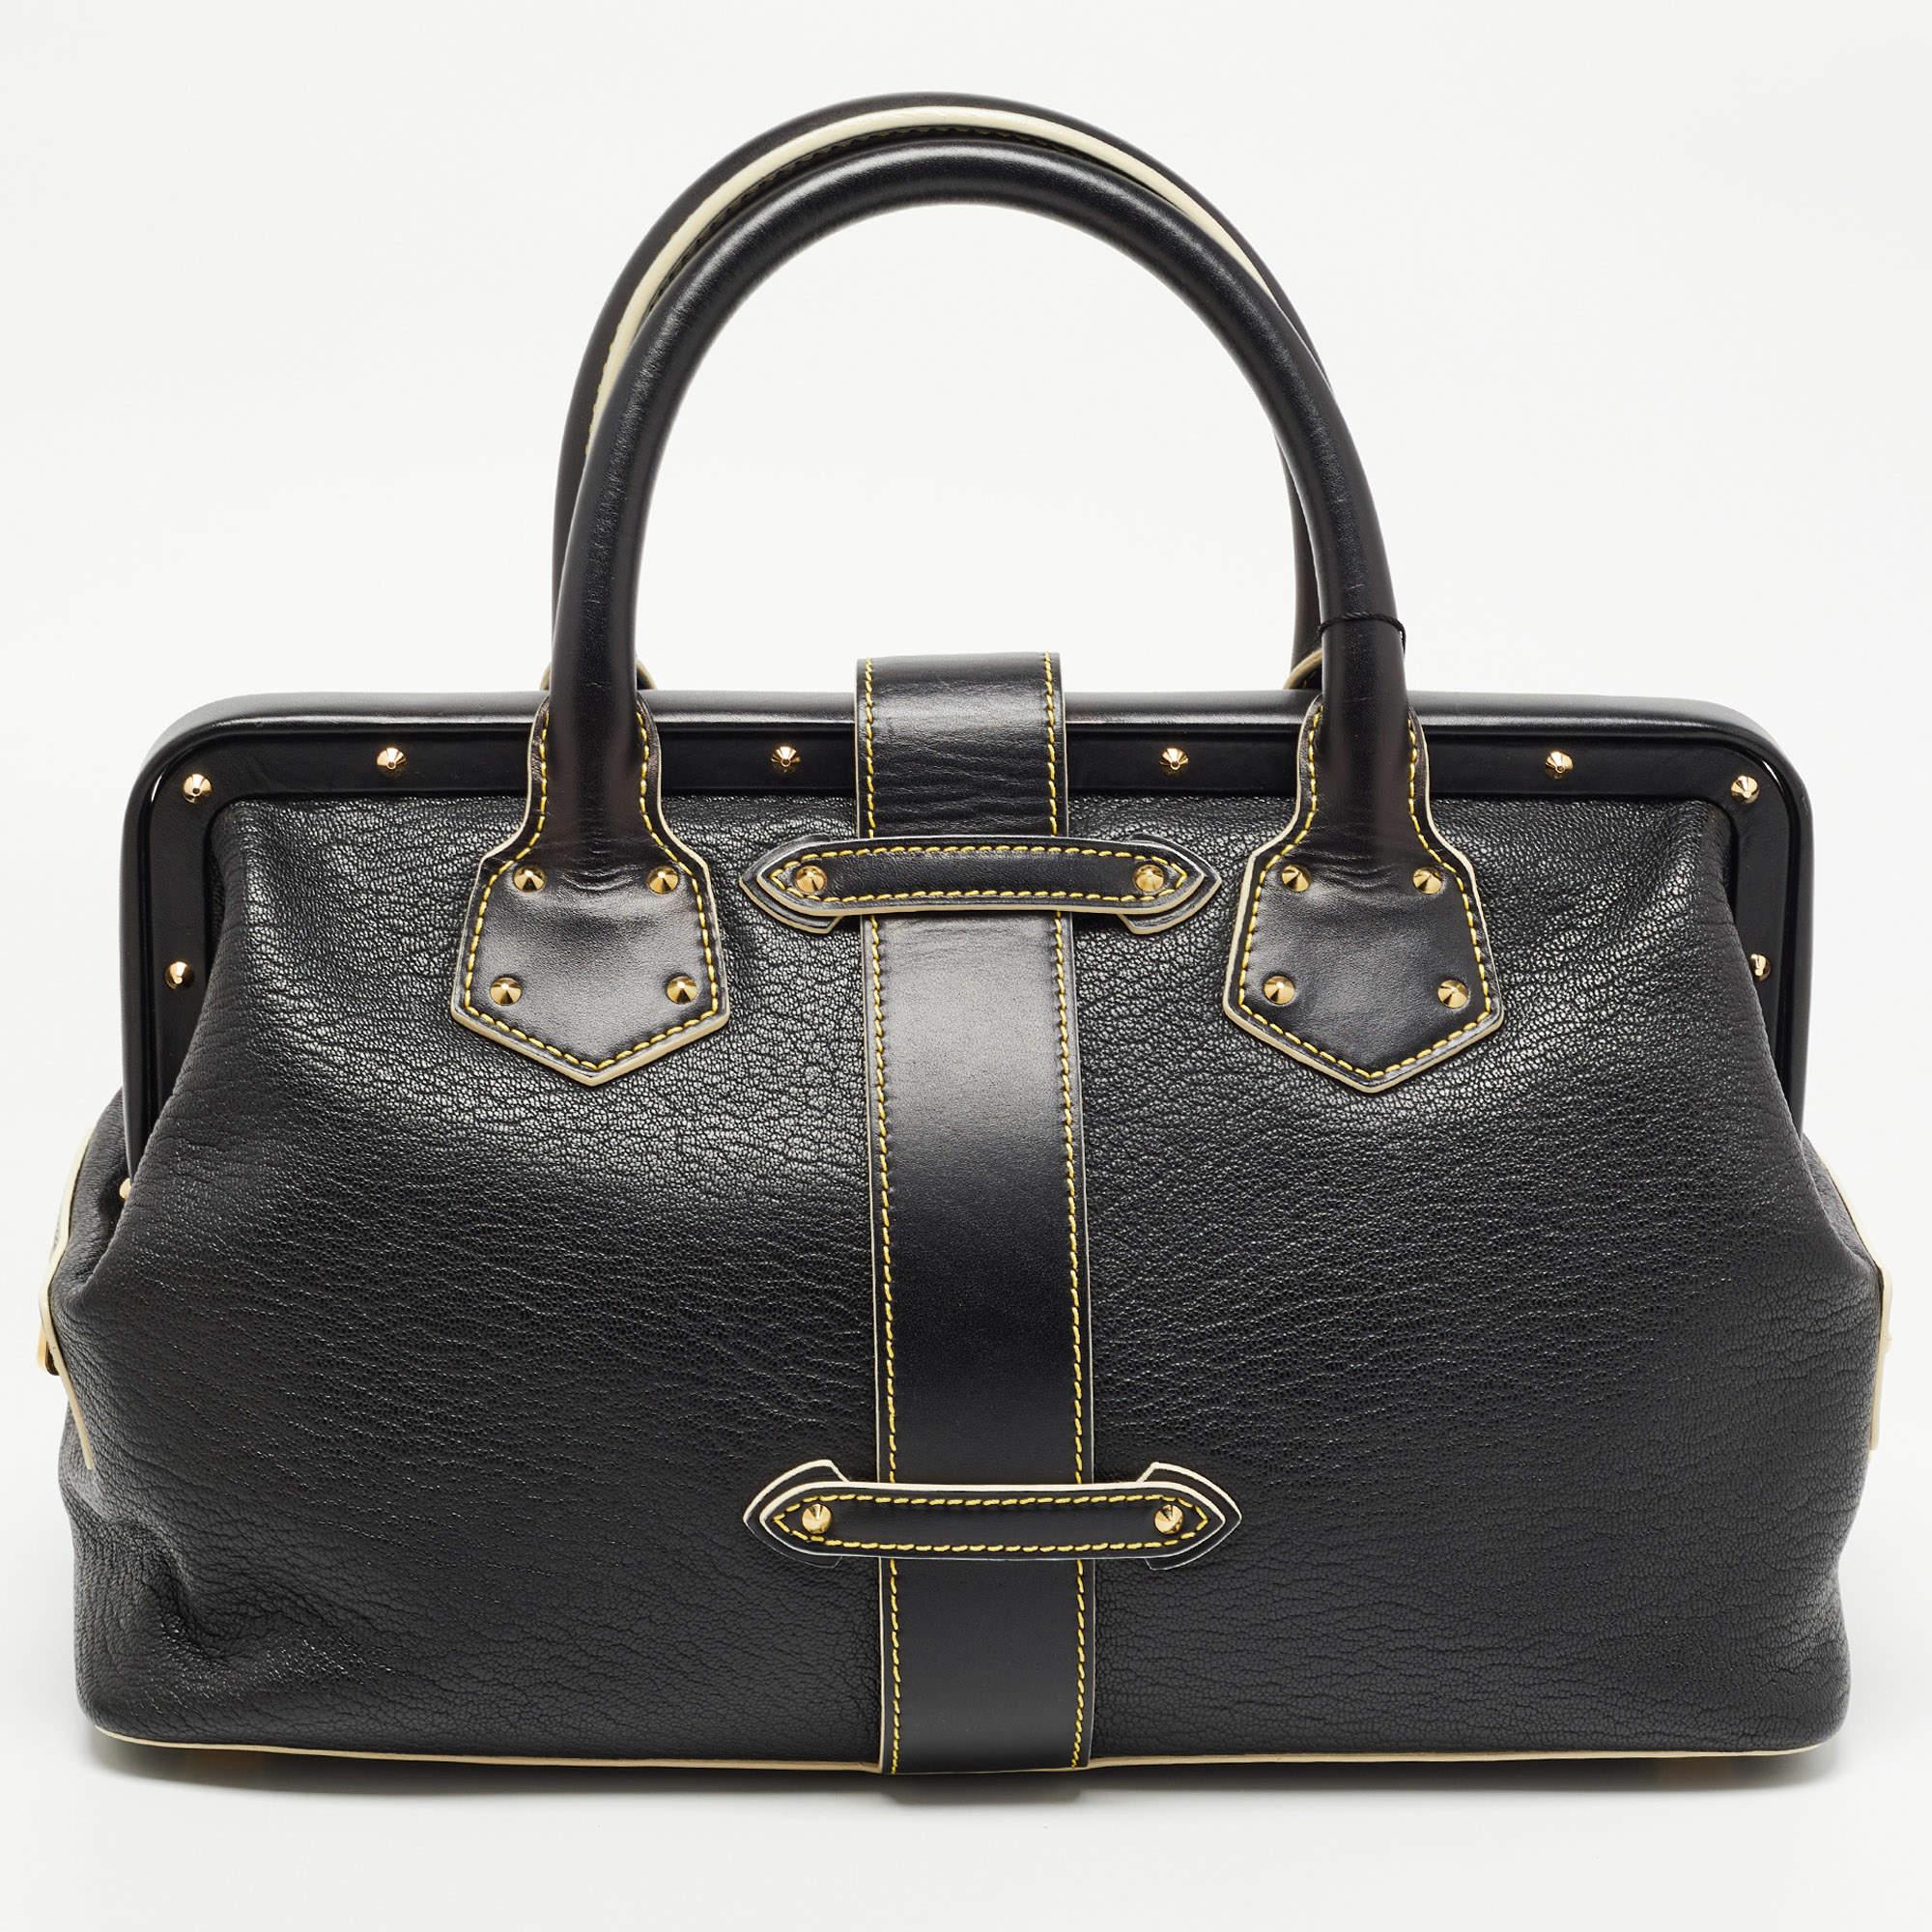 Thoughtful details, high quality, and everyday convenience mark this designer bag for women by Louis Vuitton. The bag is sewn with skill to deliver a refined look and an impeccable finish.

Includes: Brand Dustbag

